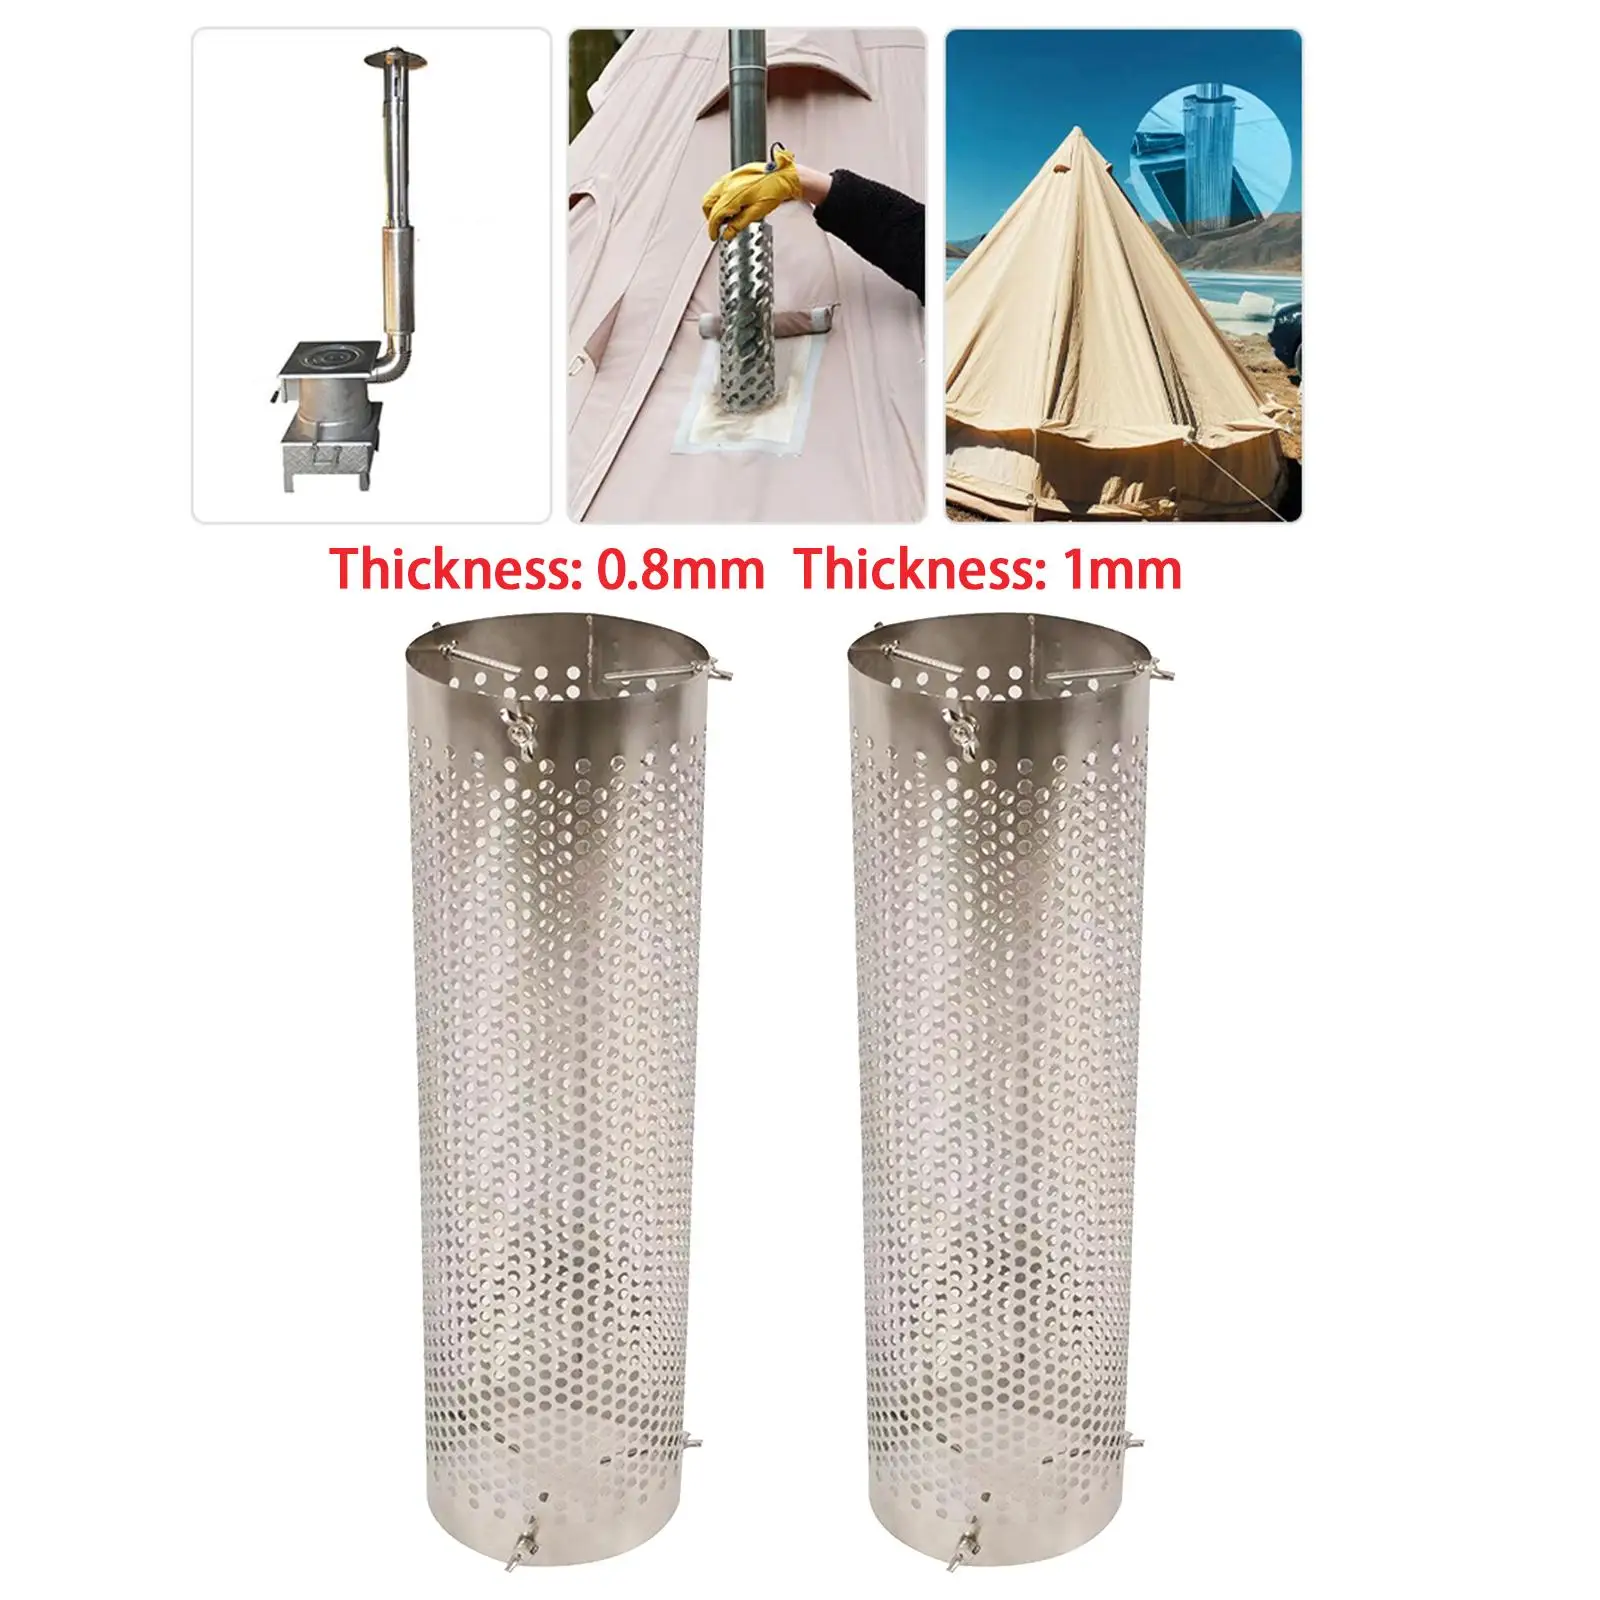 Tent Stove Chimney Pipe Mesh Chimney Cap Exhaust Pipe Portable Tent Protector Chimney Guard Stove Pipe Spark Arrestor Screen